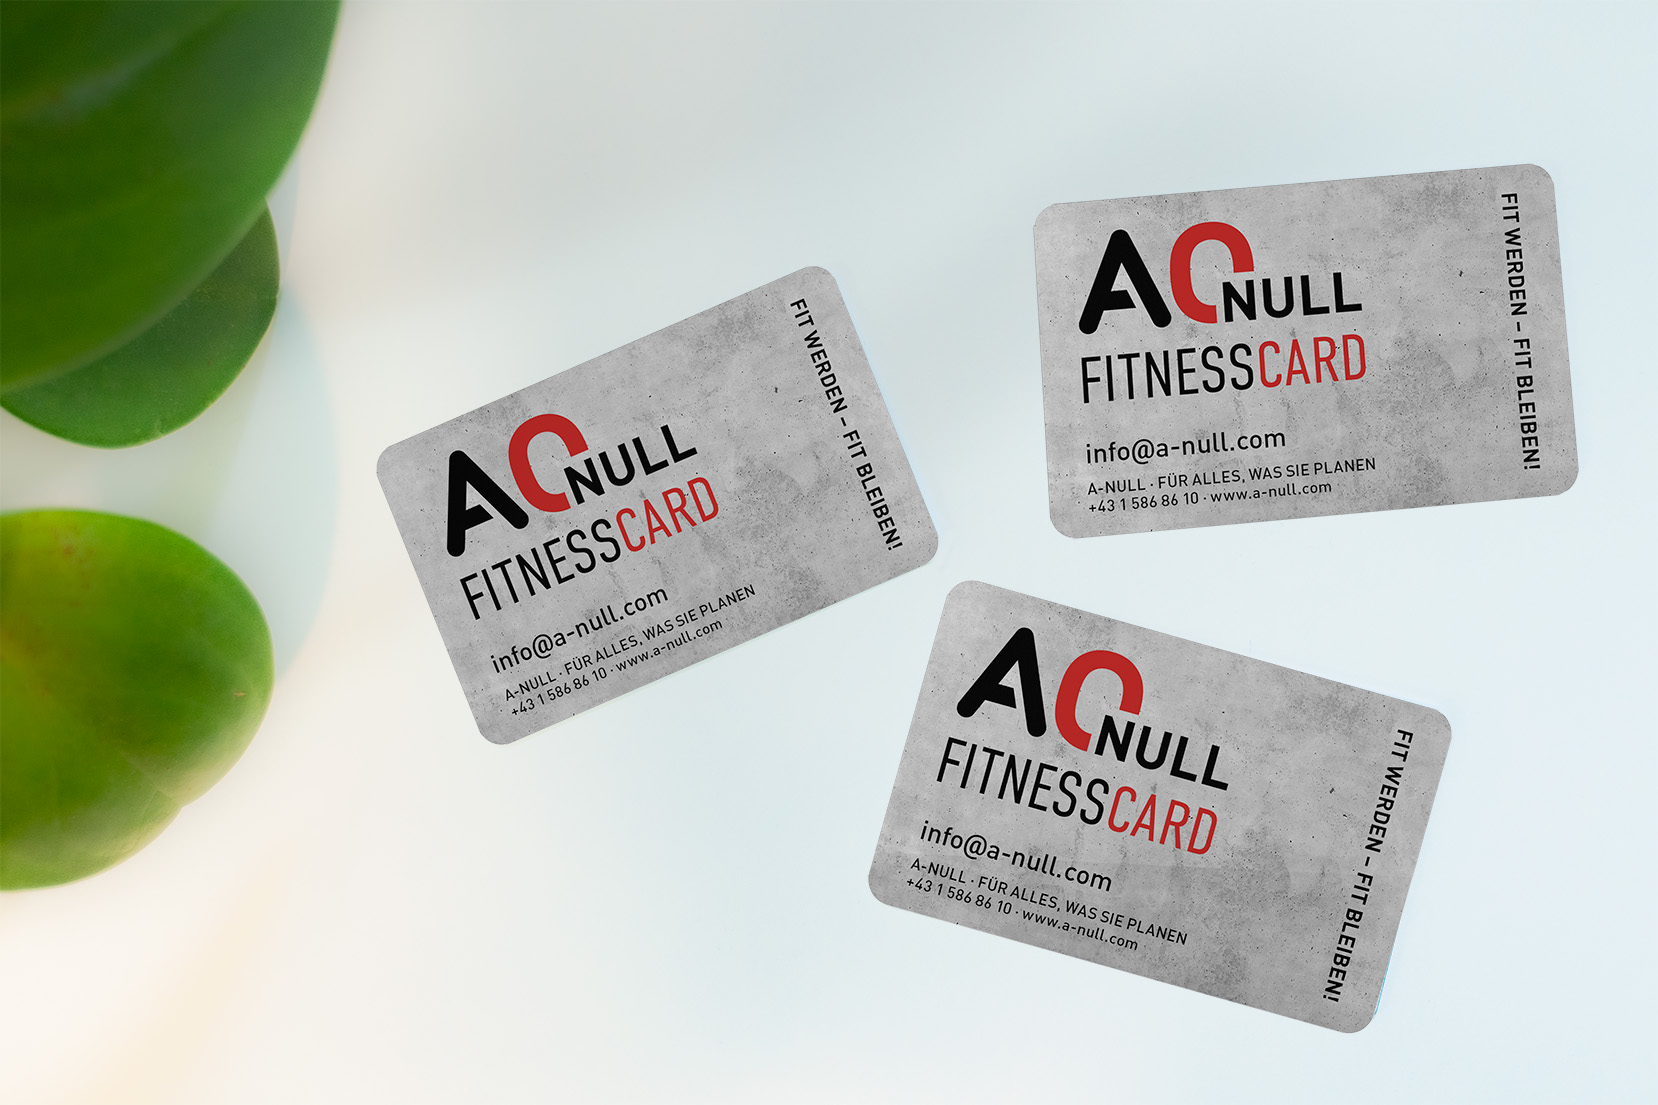 A-NULL Fitnesscard